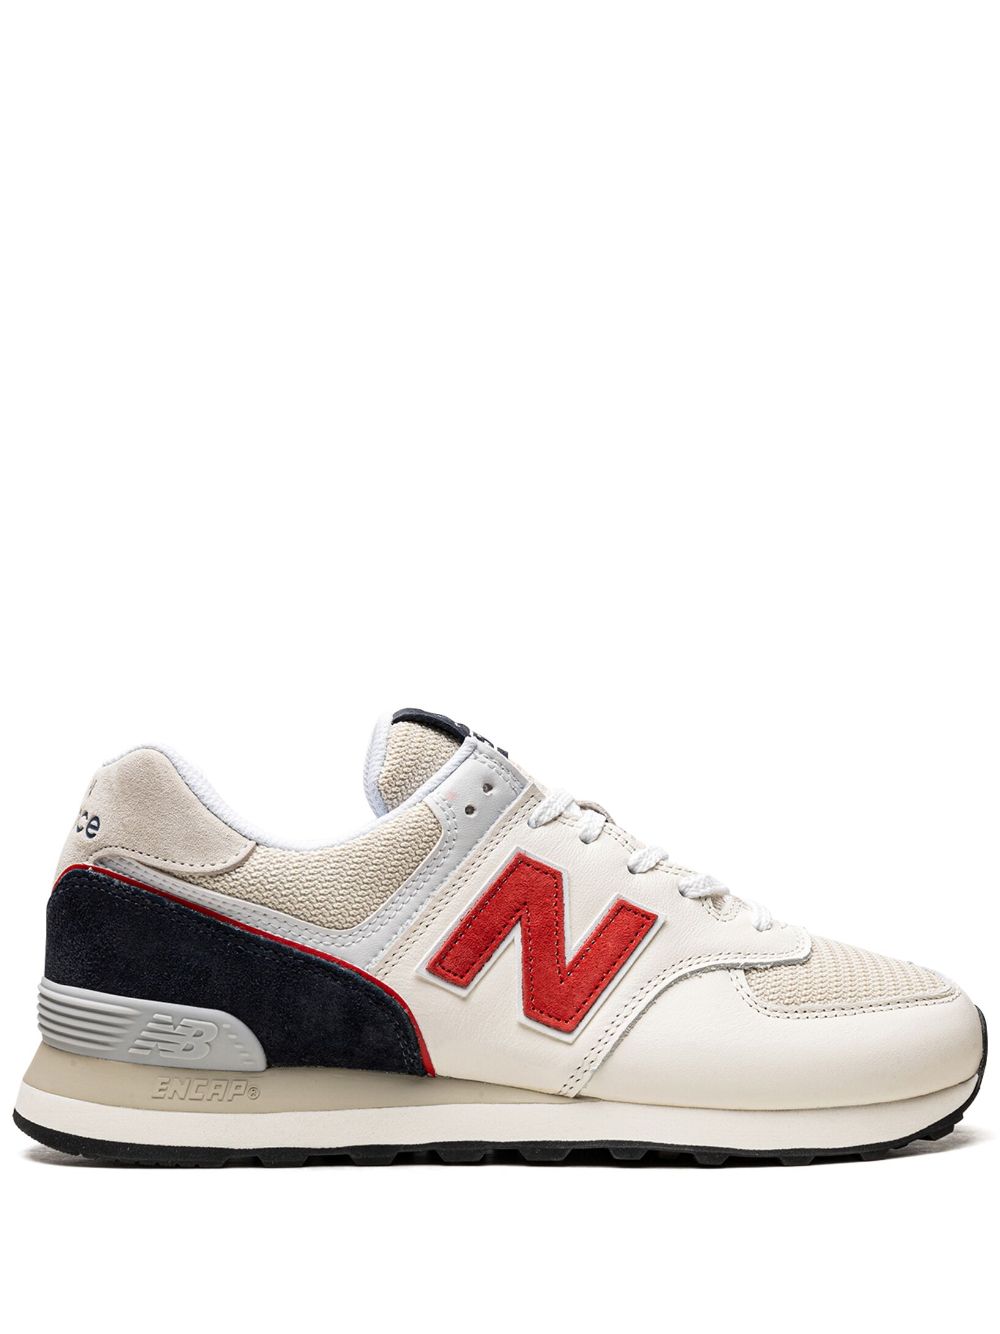 New Balance 574 "White/Light Grey/Red/Navy" sneakers